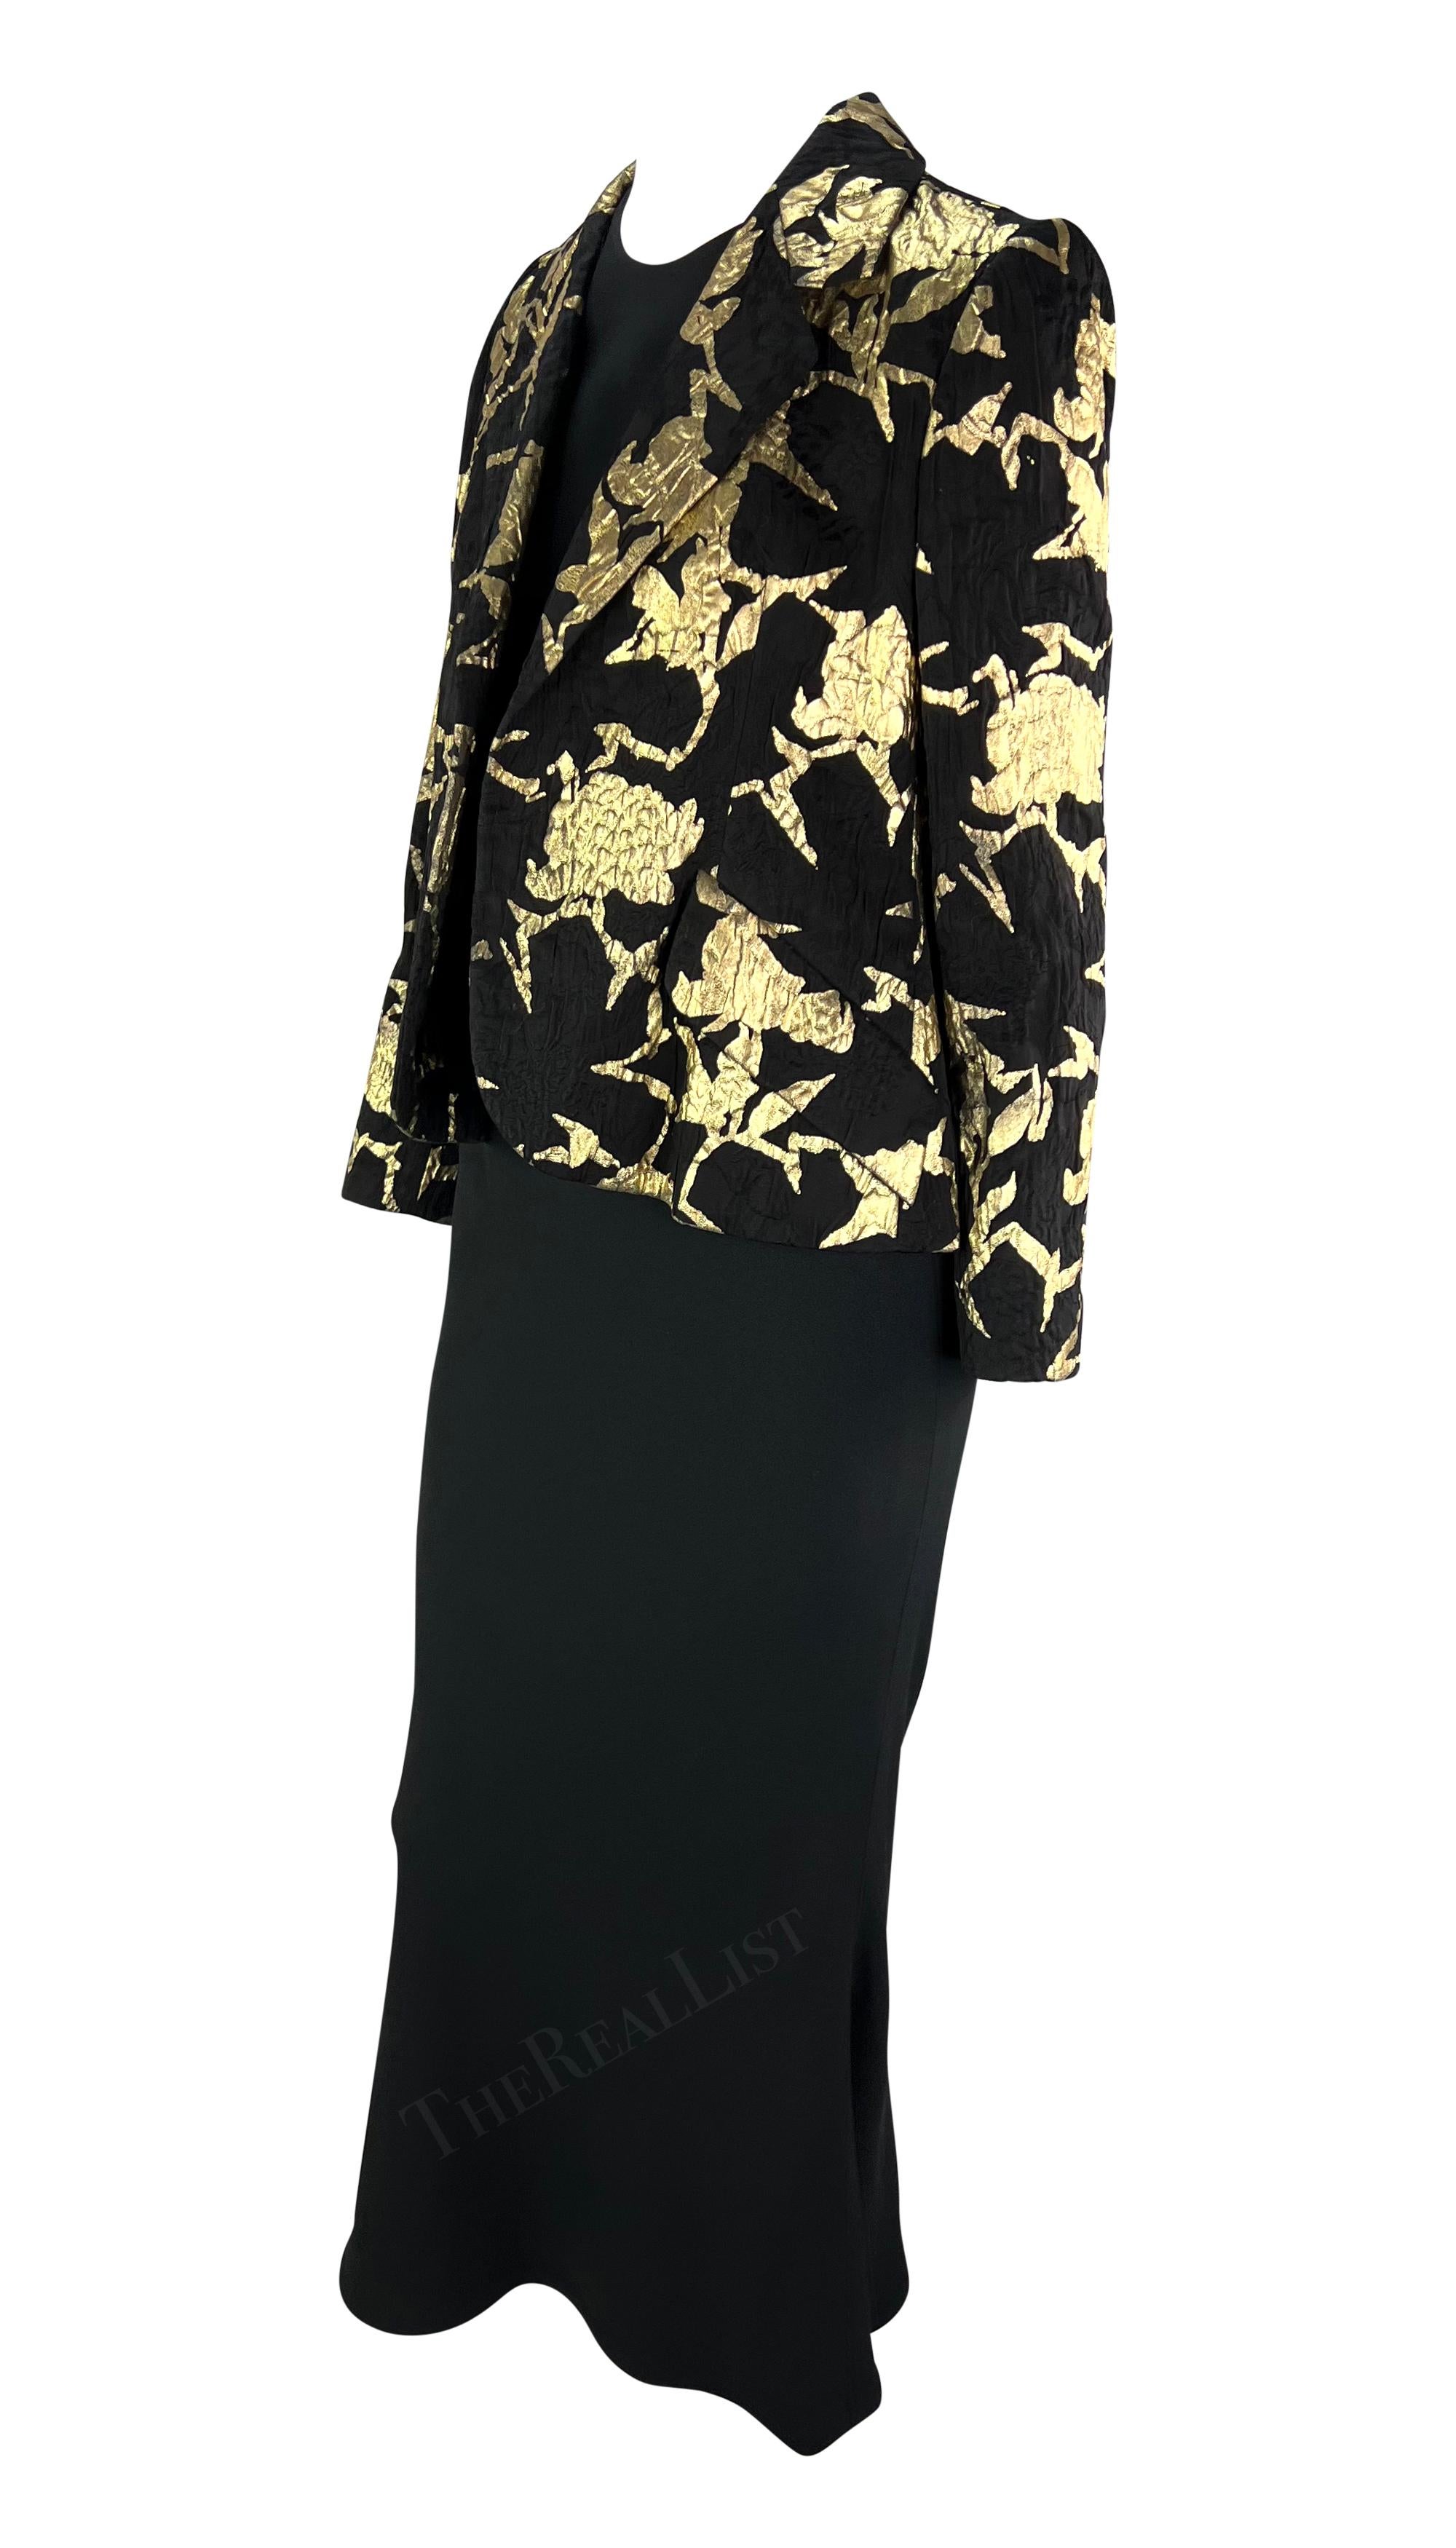 Women's S/S 2006 Christian Dior Haute Couture by Galliano Gold Black Dress Jacket Set For Sale